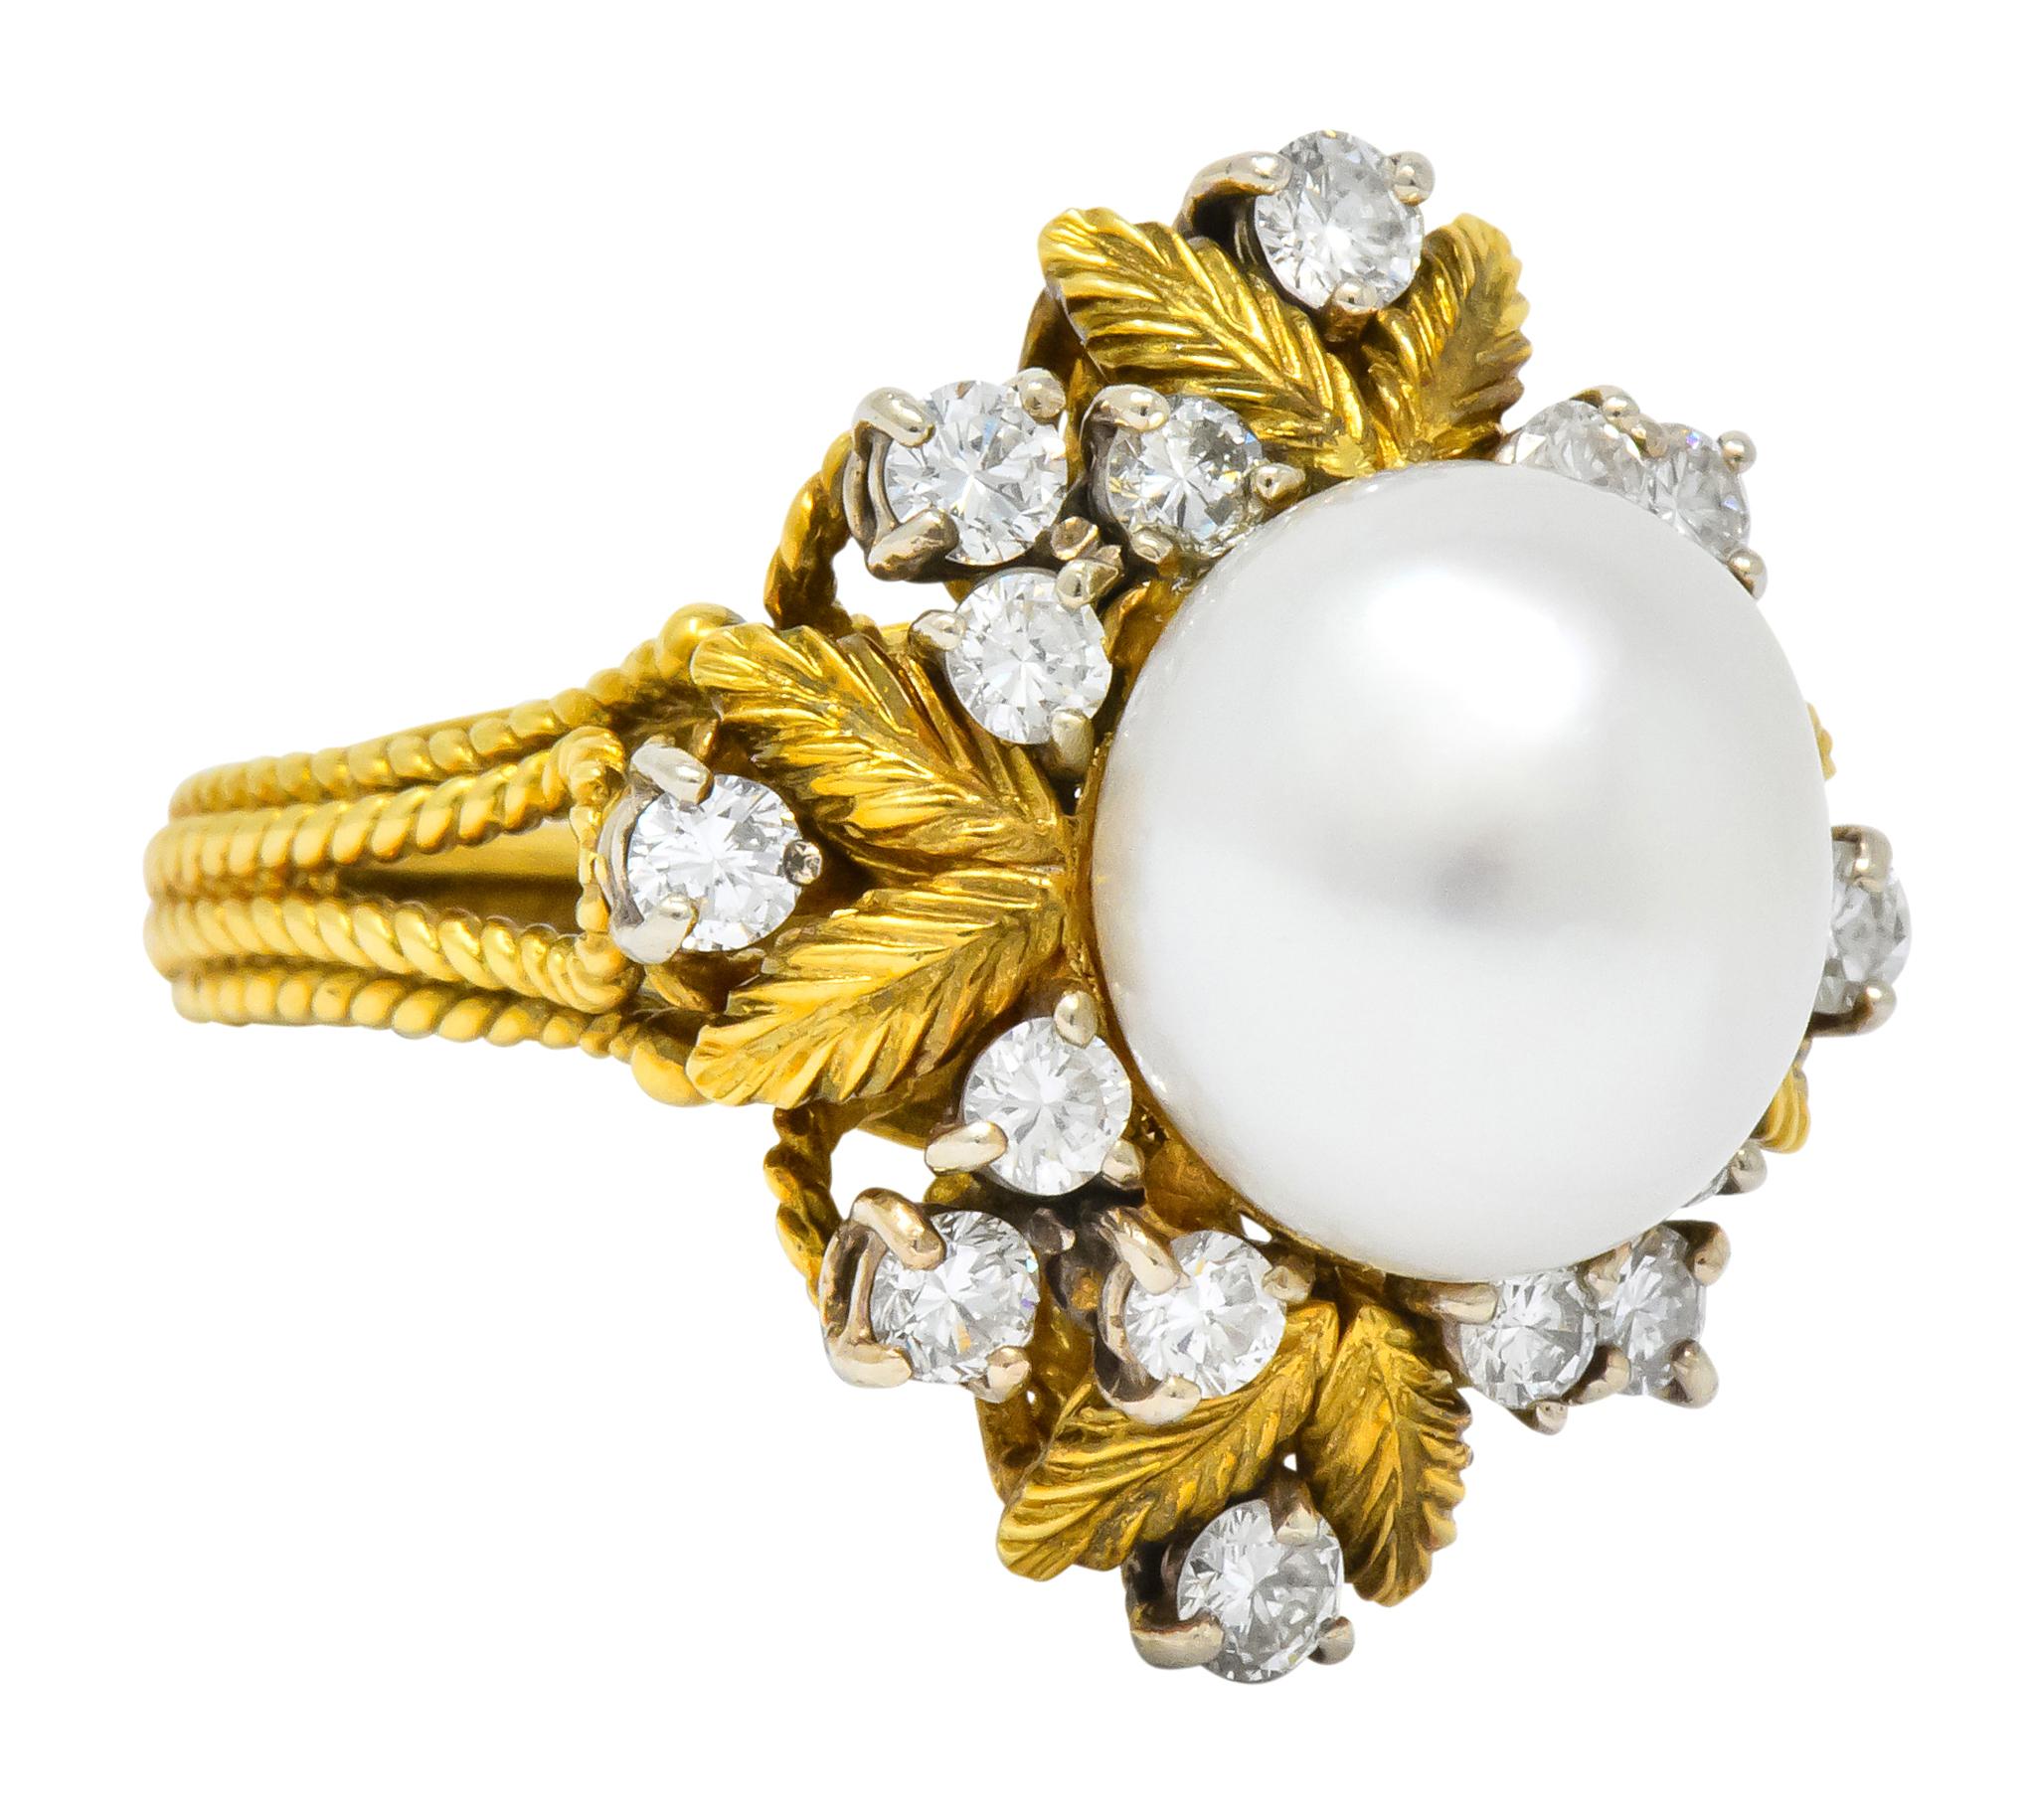 Centering a round cultured south sea pearl measuring 10.7 mm, cream body color with rosé overtone and good luster

Surrounded by detailed gold leaves with round brilliant cut diamonds, prong set in white gold, weighing approximately 0.95 carat